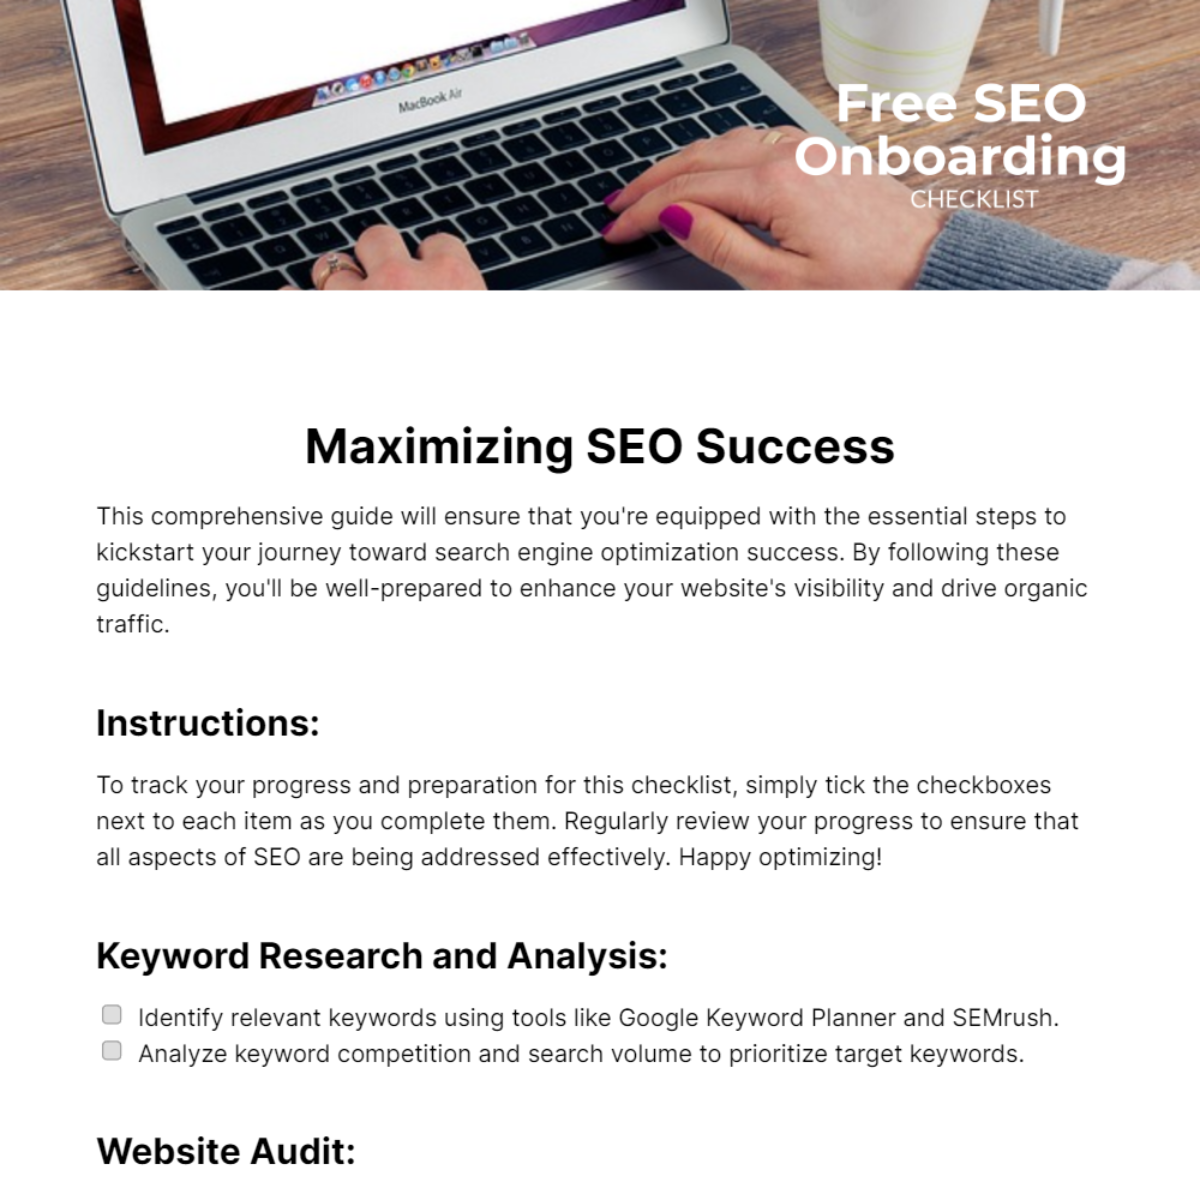 SEO Onboarding Checklist Template